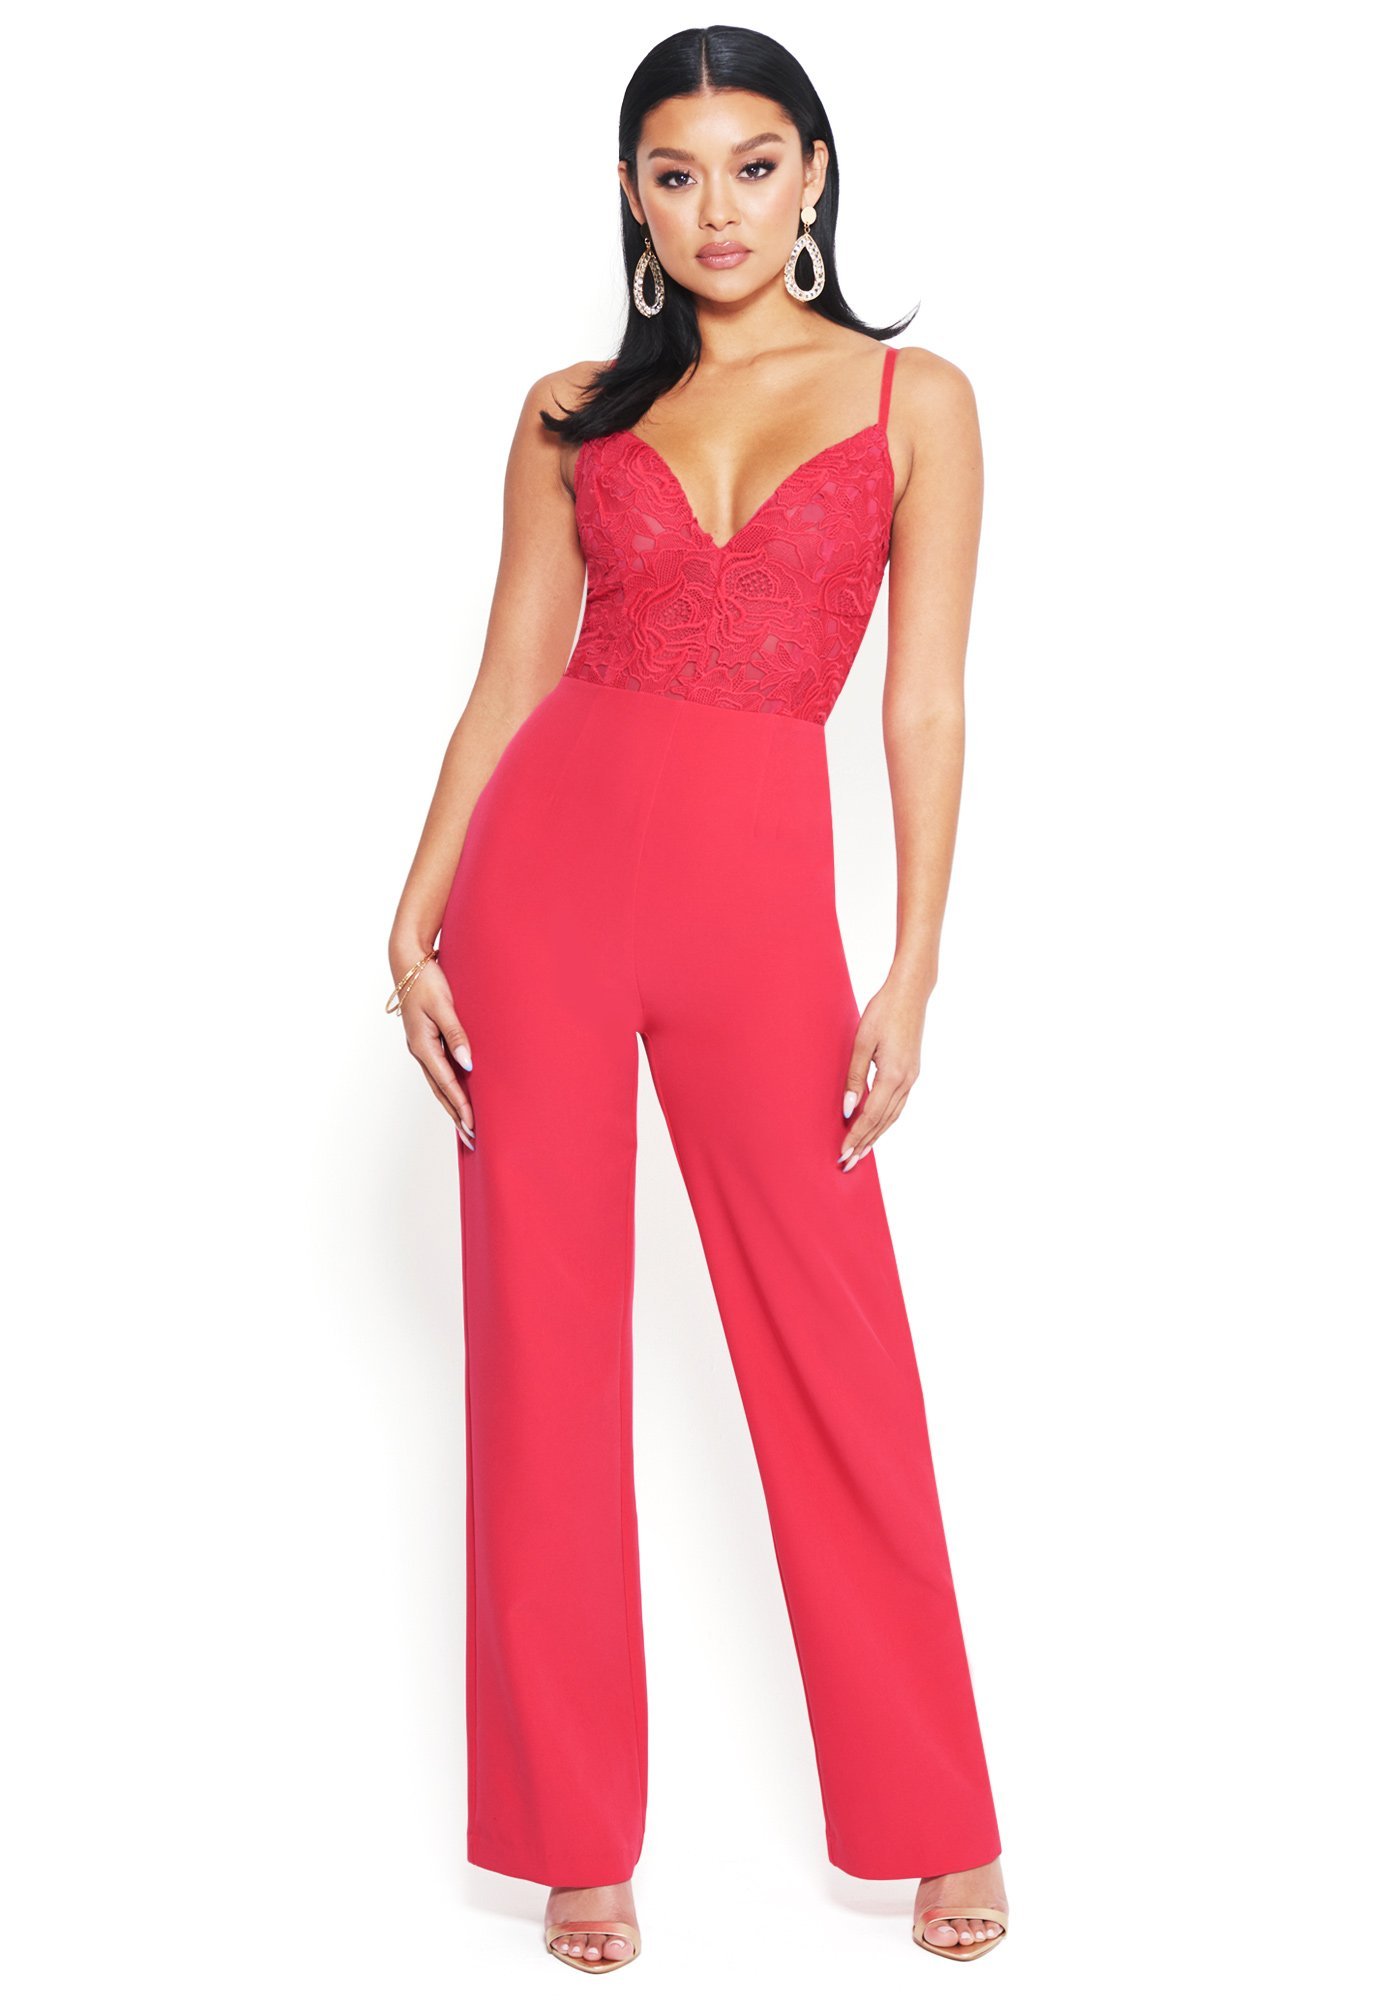 Bebe Women's Embroidered Lace Jumpsuit, Size 4 in Love Potion